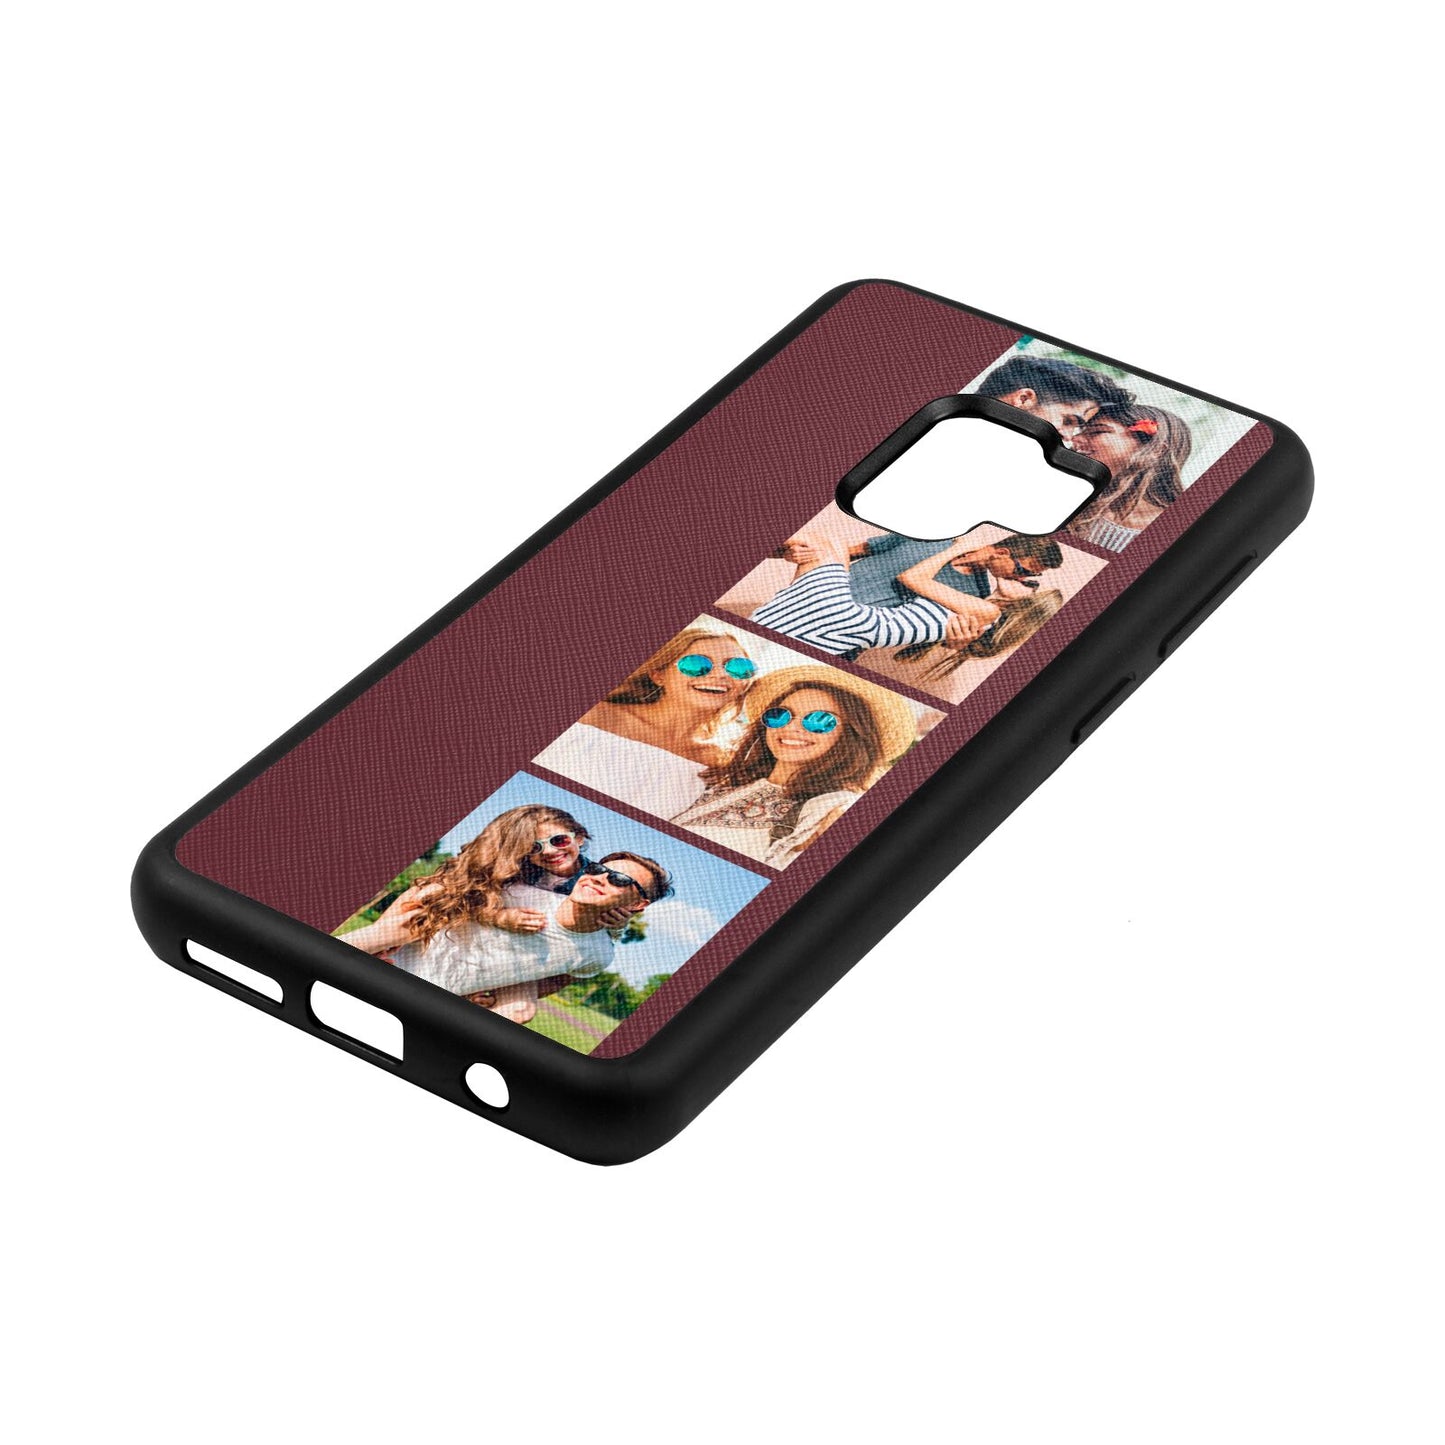 Photo Strip Montage Upload Rose Brown Saffiano Leather Samsung S9 Case Side Angle